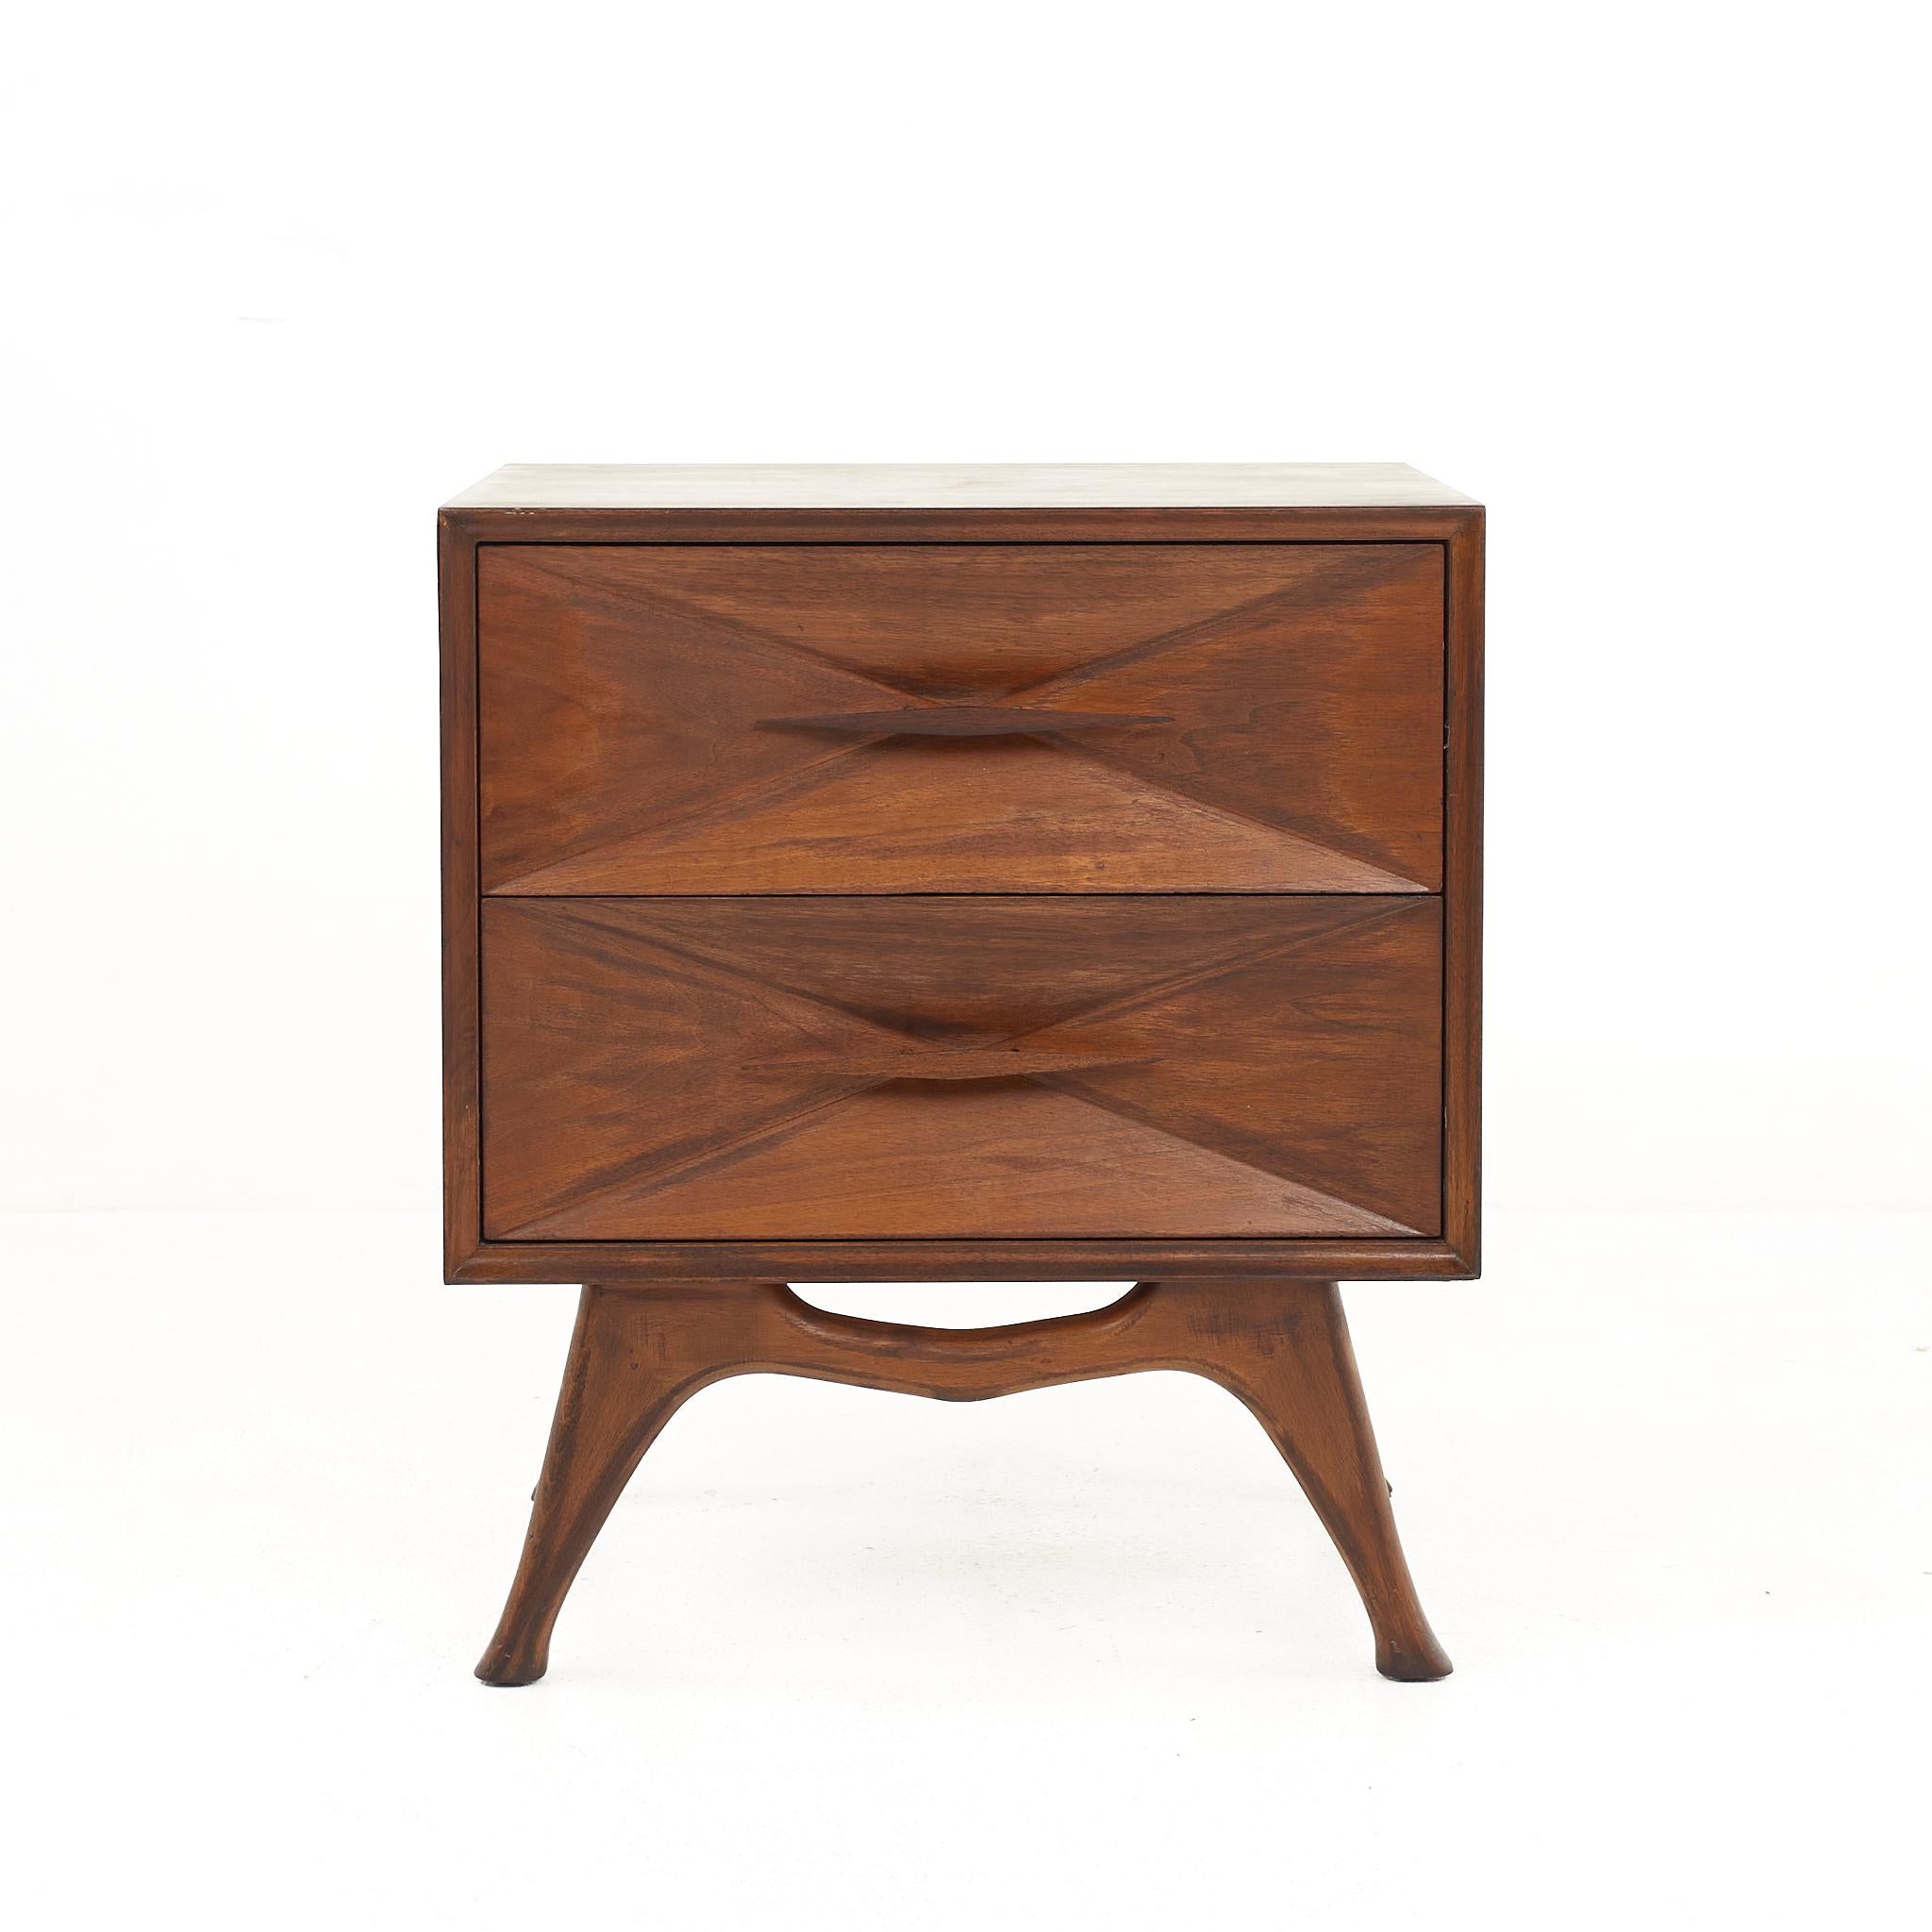 Albert Parvin mid century walnut nightstand.

The nightstand measures: 22 wide x 16 deep x 25.5 inches high.

All pieces of furniture can be had in what we call restored vintage condition. That means the piece is restored upon purchase so it’s